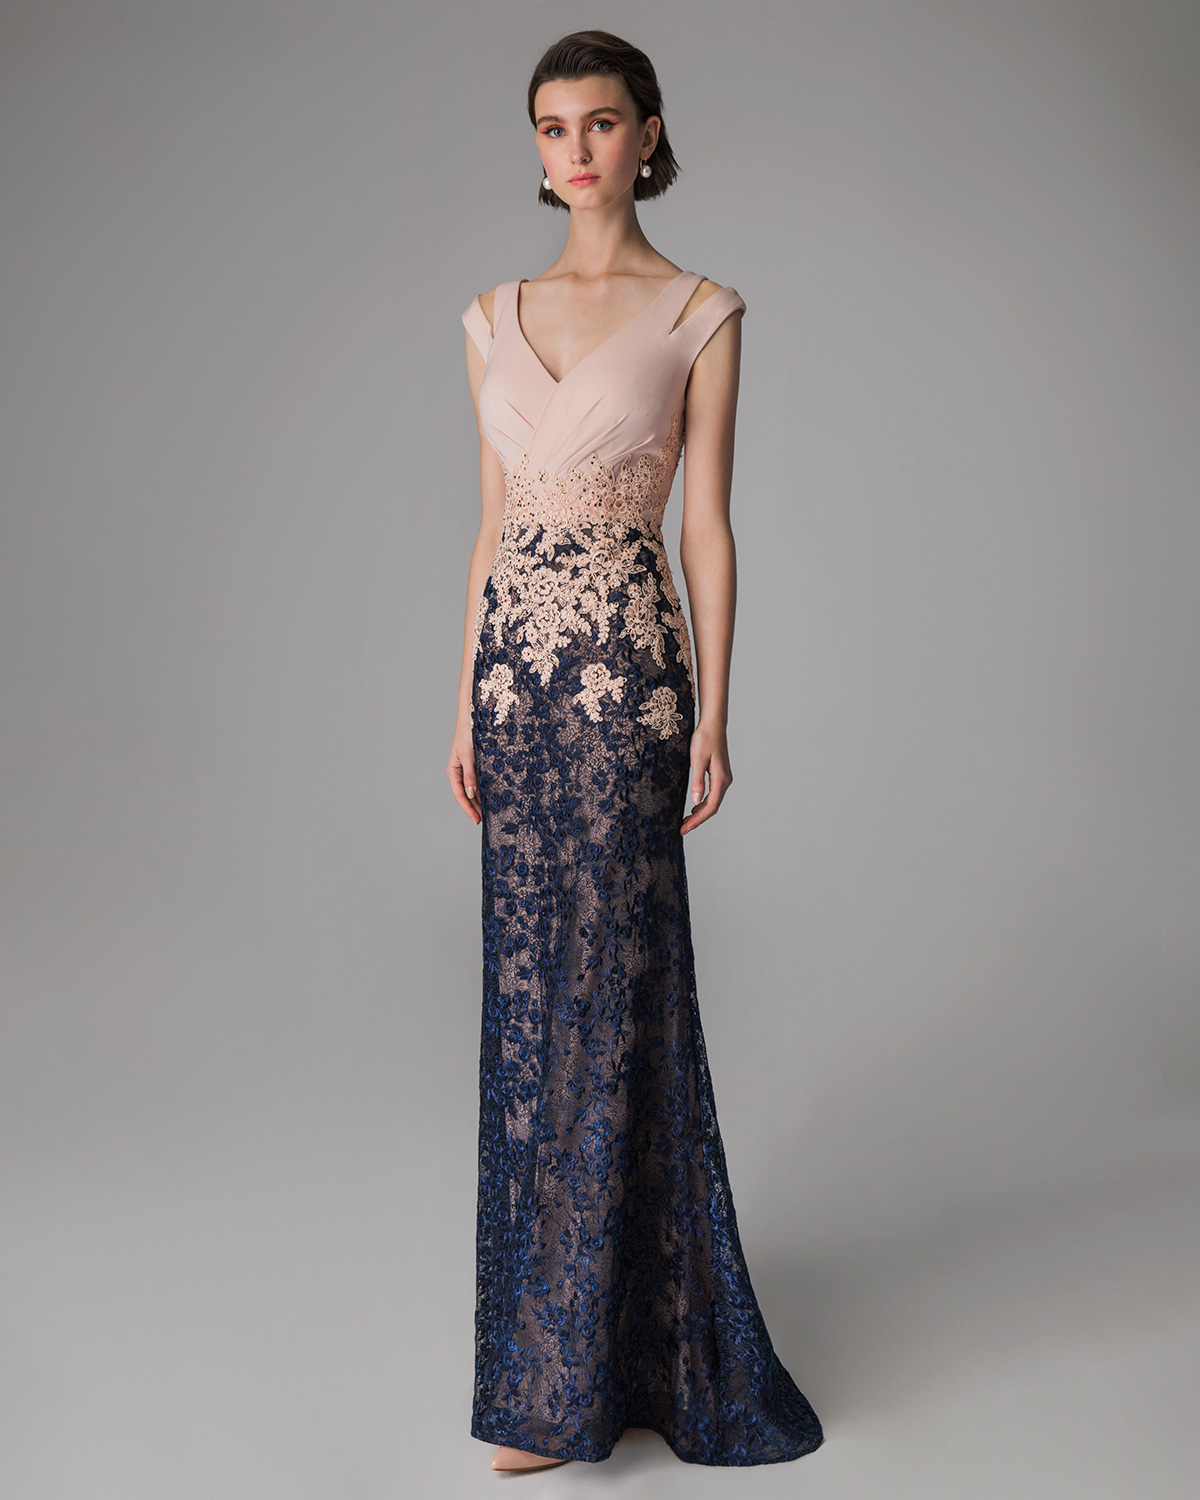 Classic Dresses / Long evening dress with lace